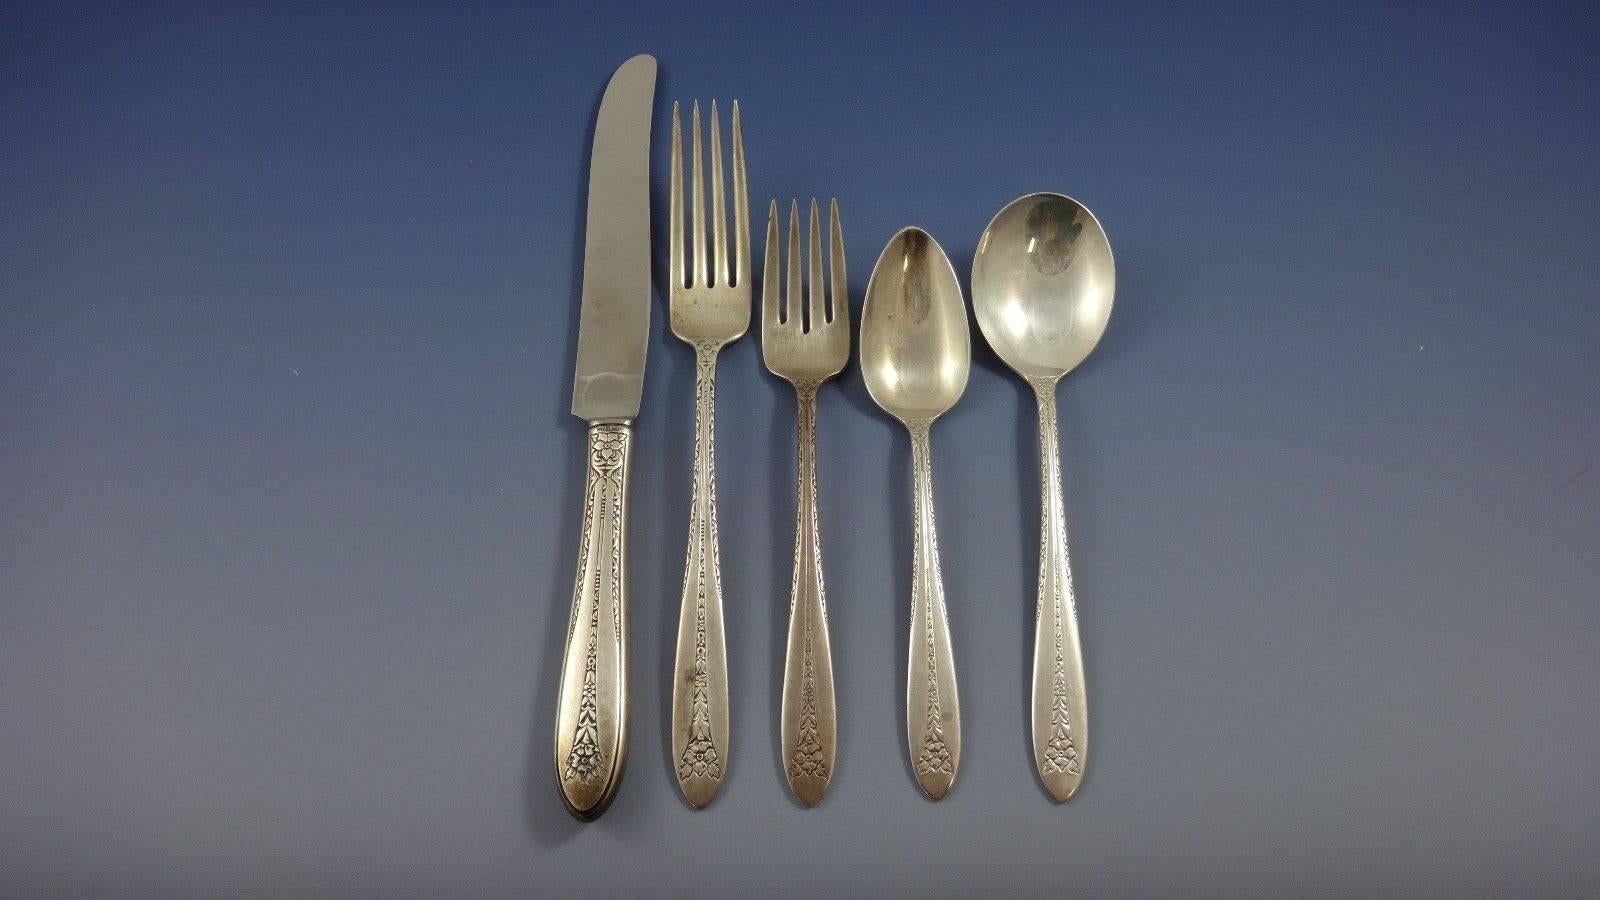 Margaret rose by National dinner size sterling silver flatware set - 43 pieces. This set includes:

Eight dinner size knives, 9 1/2